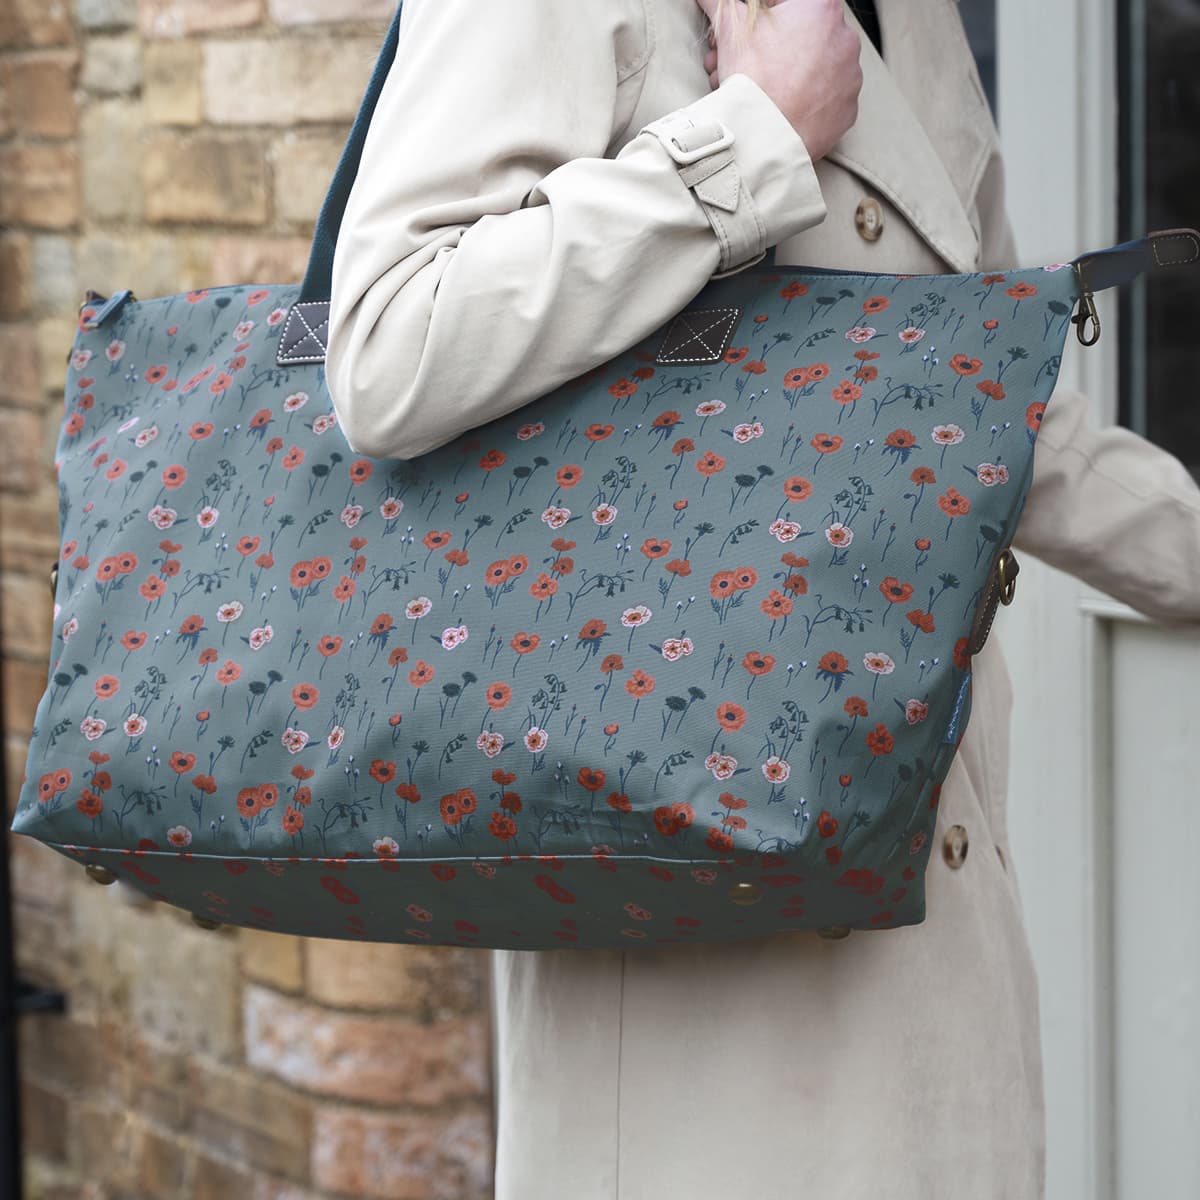 Poppy Meadow Weekend Oundle Bag By Sophie Allport 